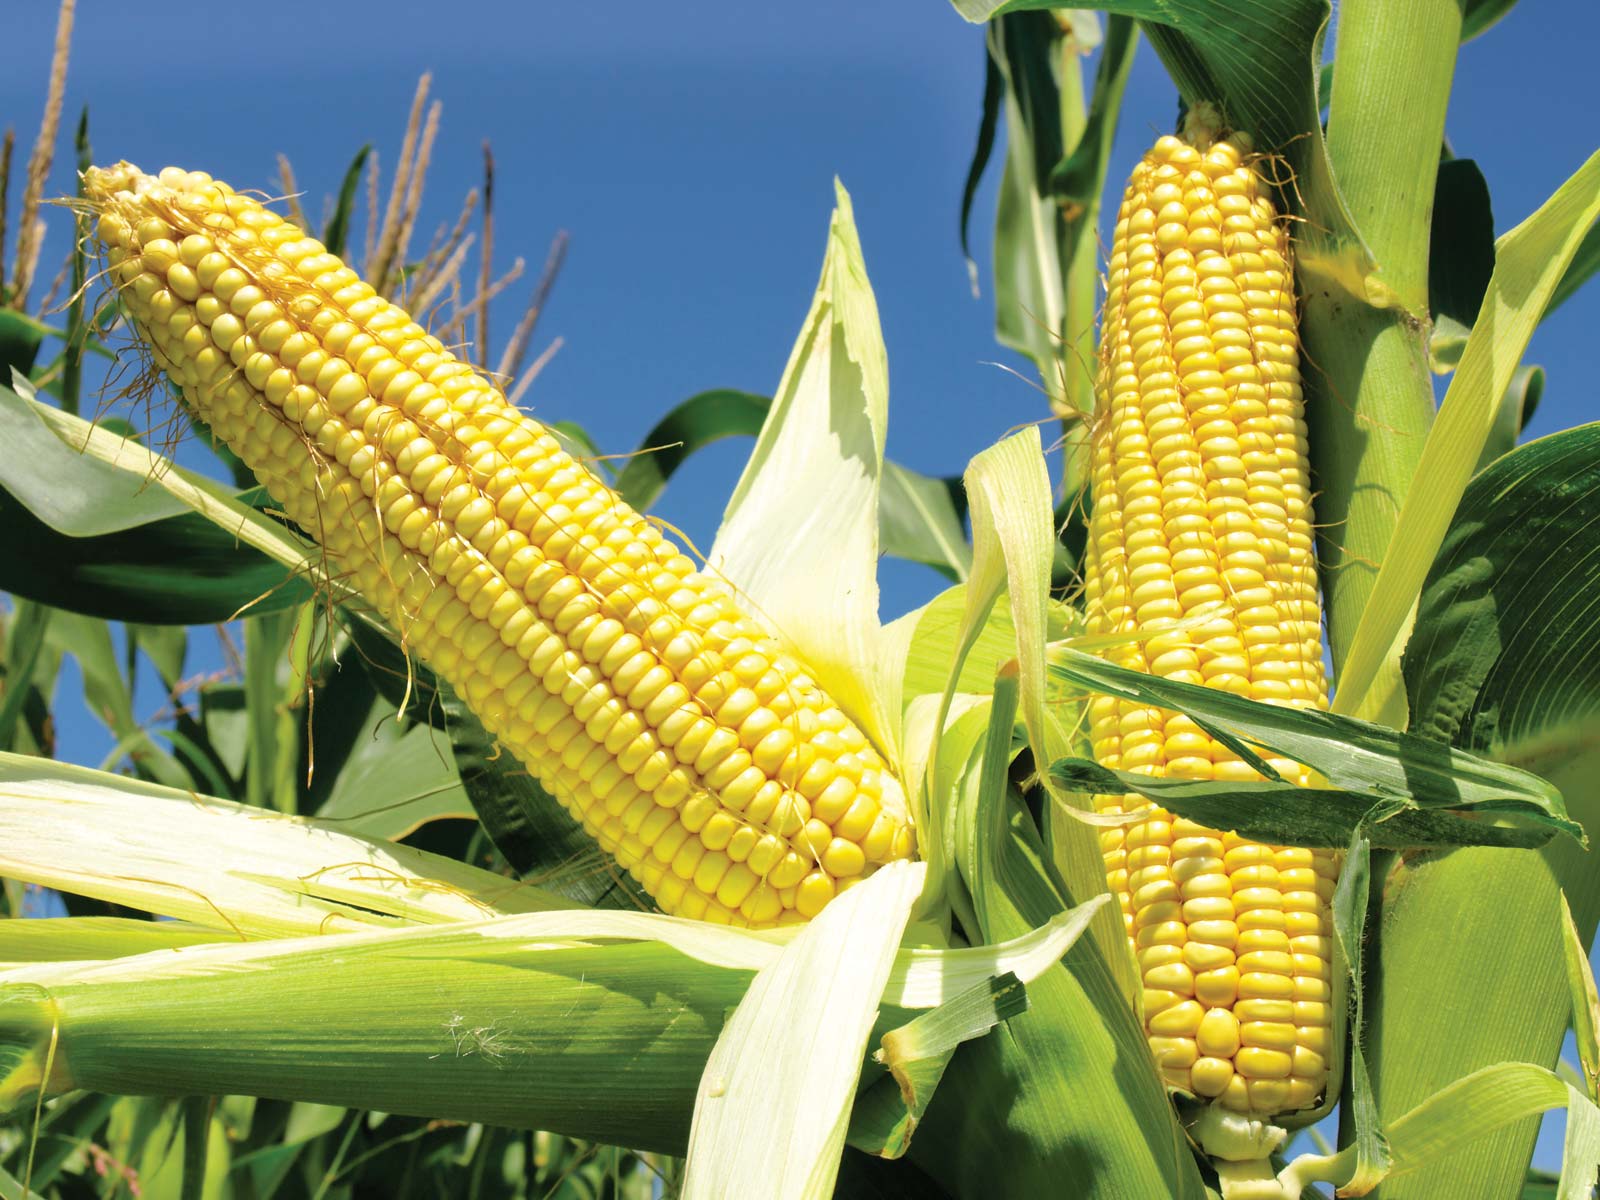 Control of Insects in Corn